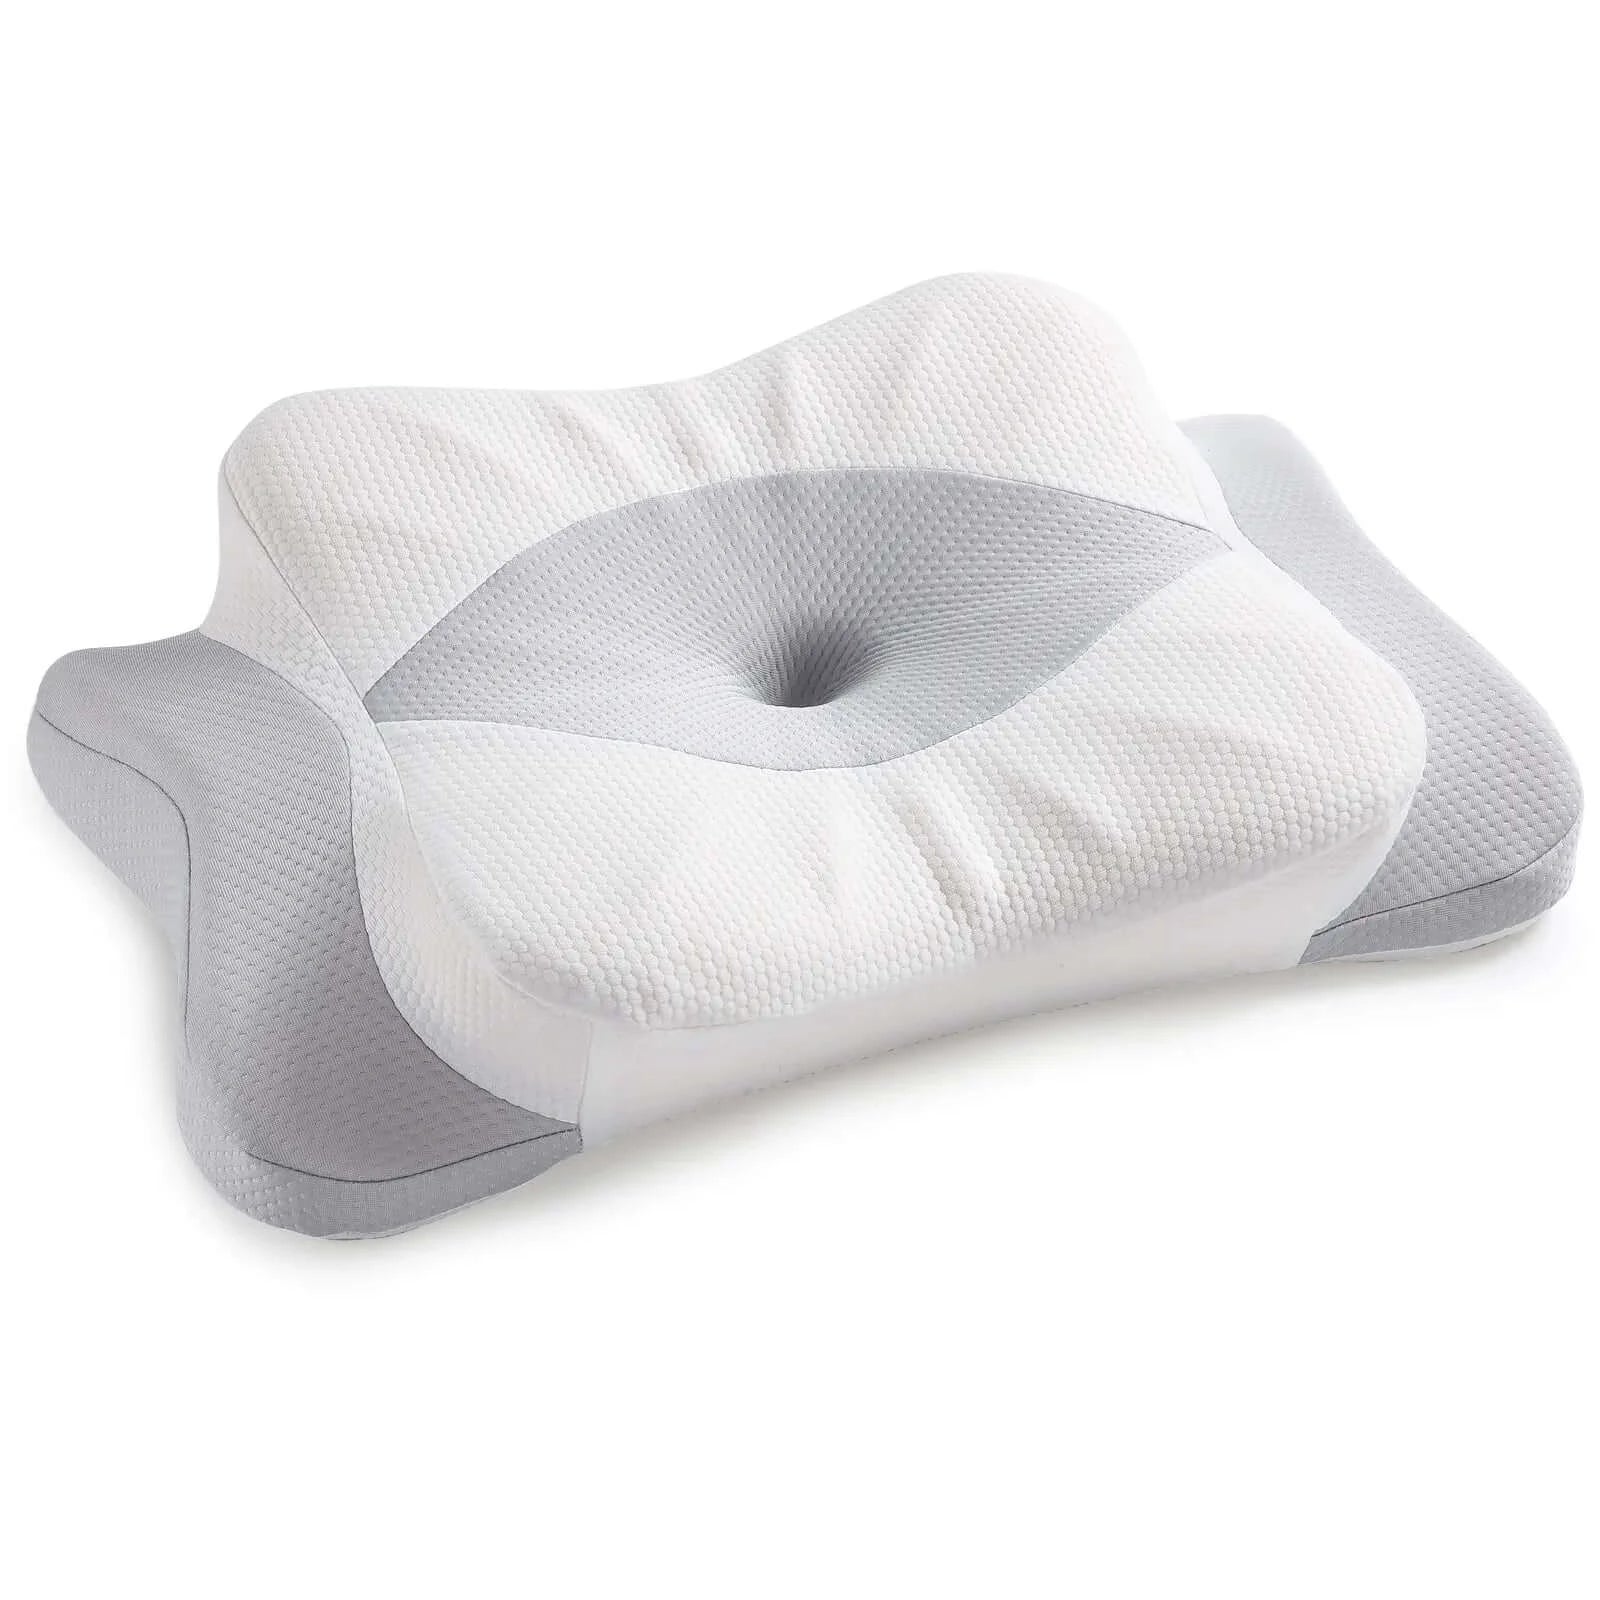 Image of OleOle Ergonomic Memory Foam Pillow - Perfect for Side, Back, and Stomach Sleepers ultimate comfort & support.